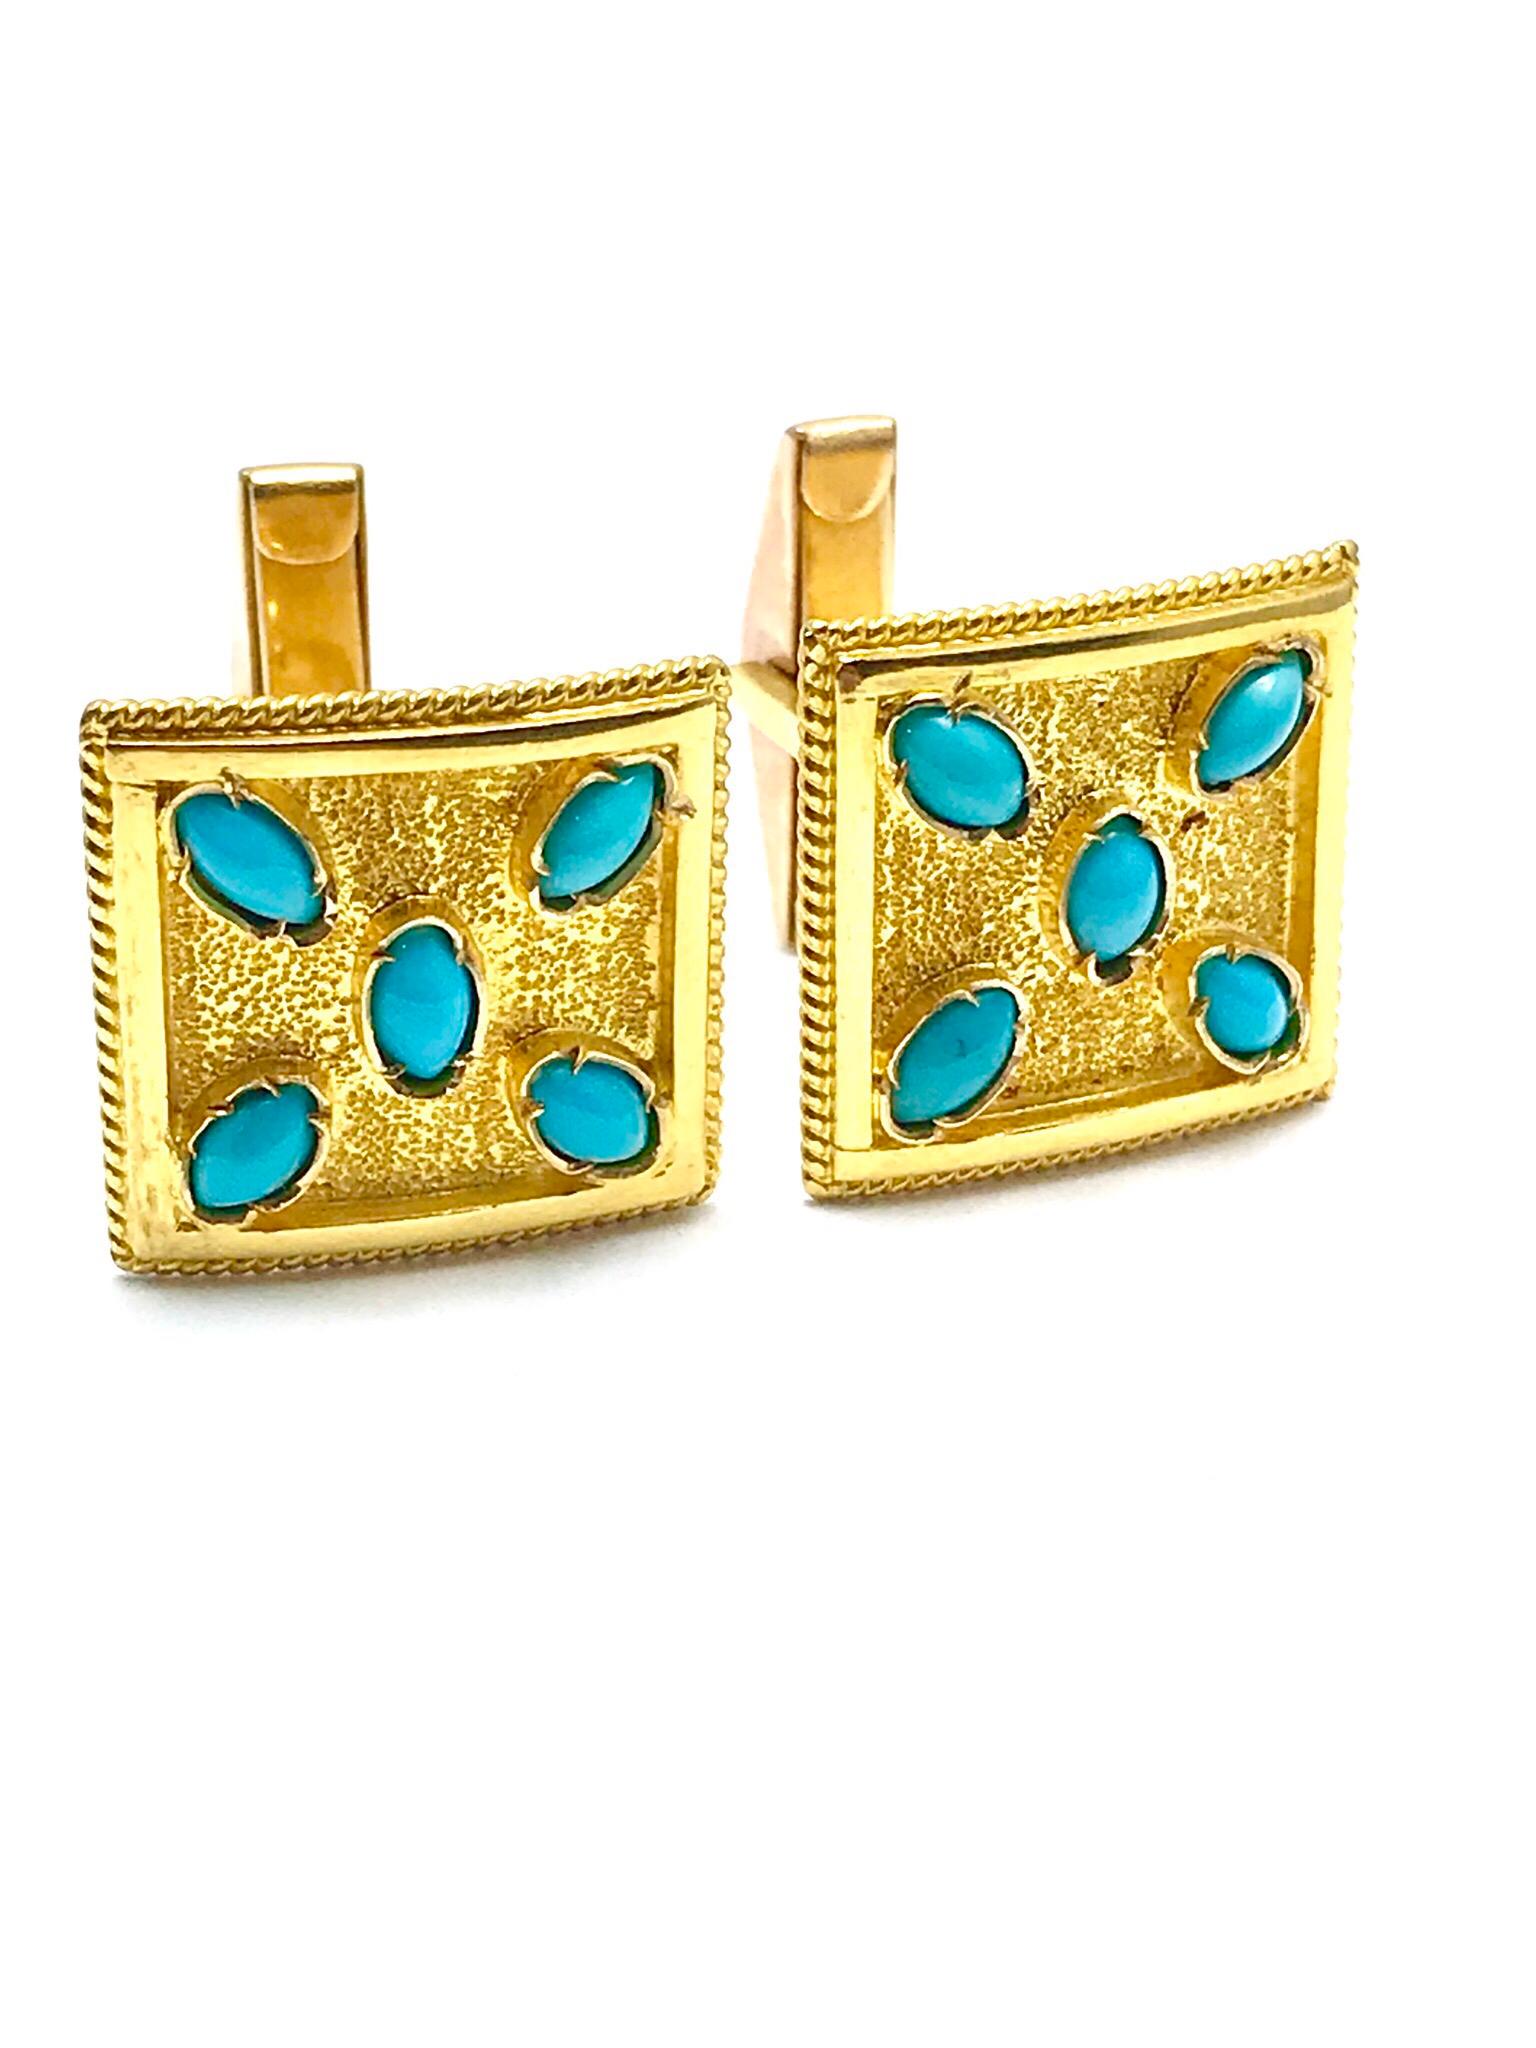 A great pair of Turquoise and 18 karat yellow gold cufflinks!  Each cufflink has five prong set cabochon turquoise sitting atop a bright textured gold and high polish frame on a simple toggle back, for ease of use.  The cufflinks measure 18.00 x